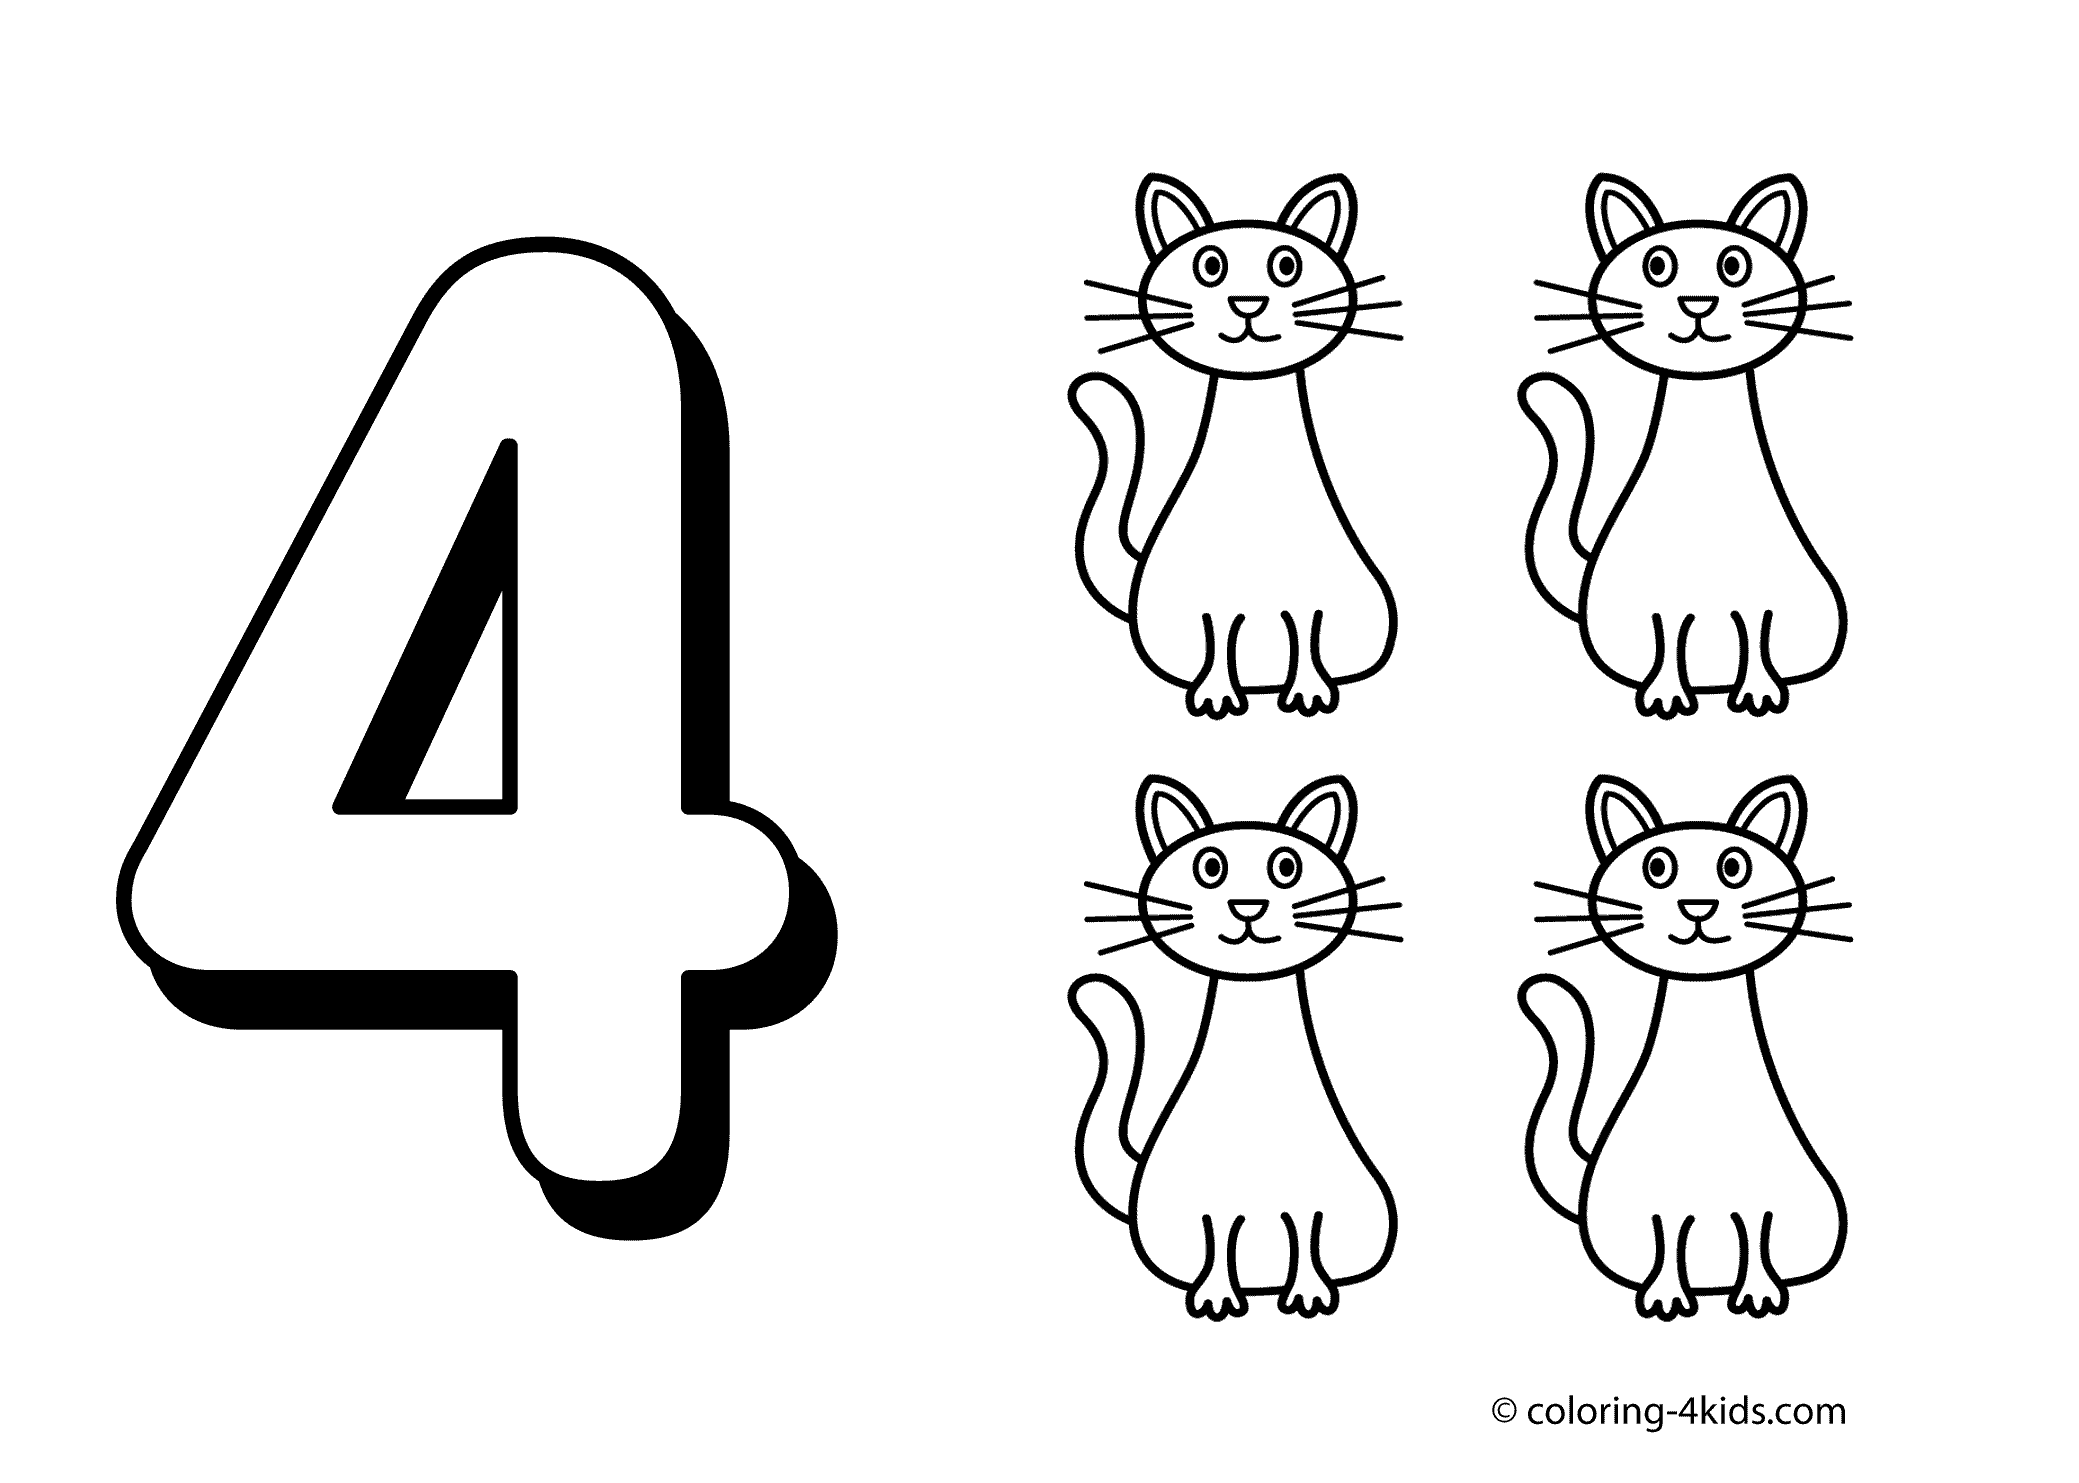 get-this-number-4-coloring-page-4514a